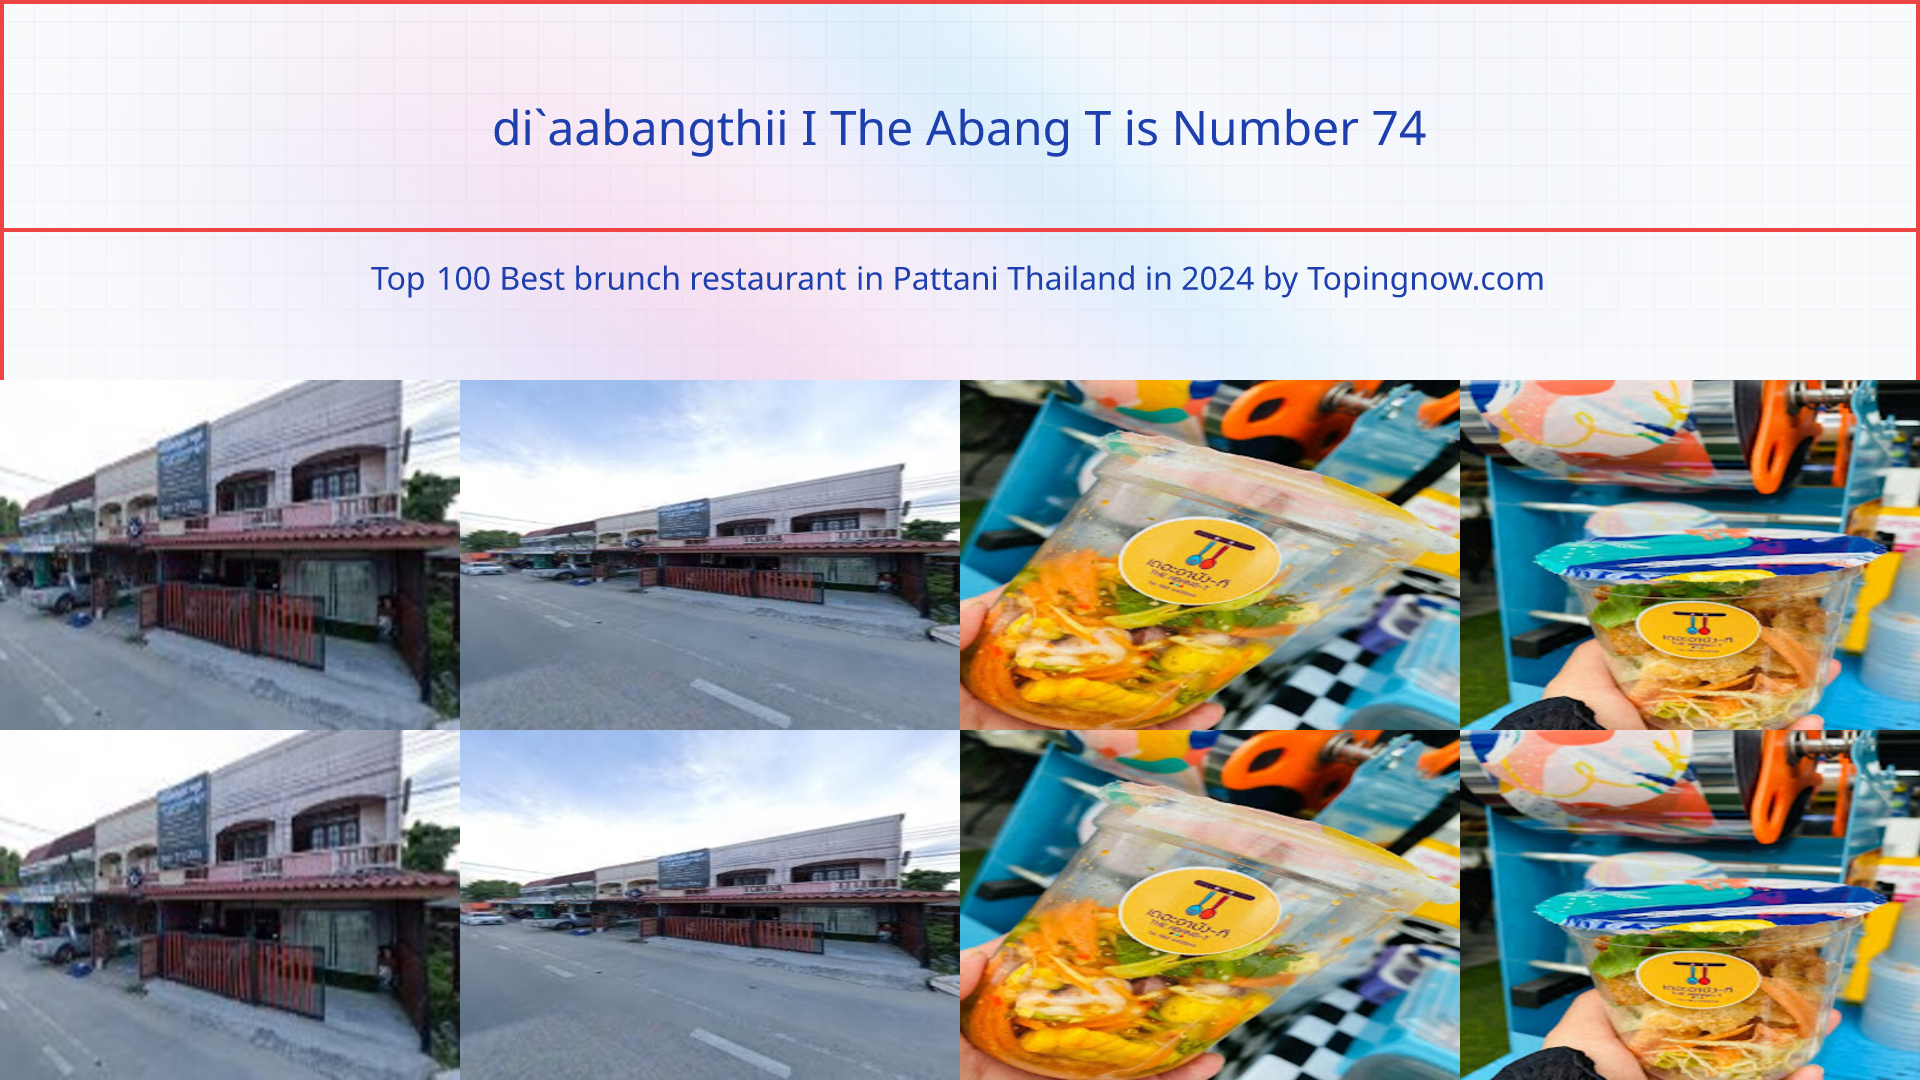 di`aabangthii I The Abang T: Top 100 Best brunch restaurant in Pattani Thailand in 2024